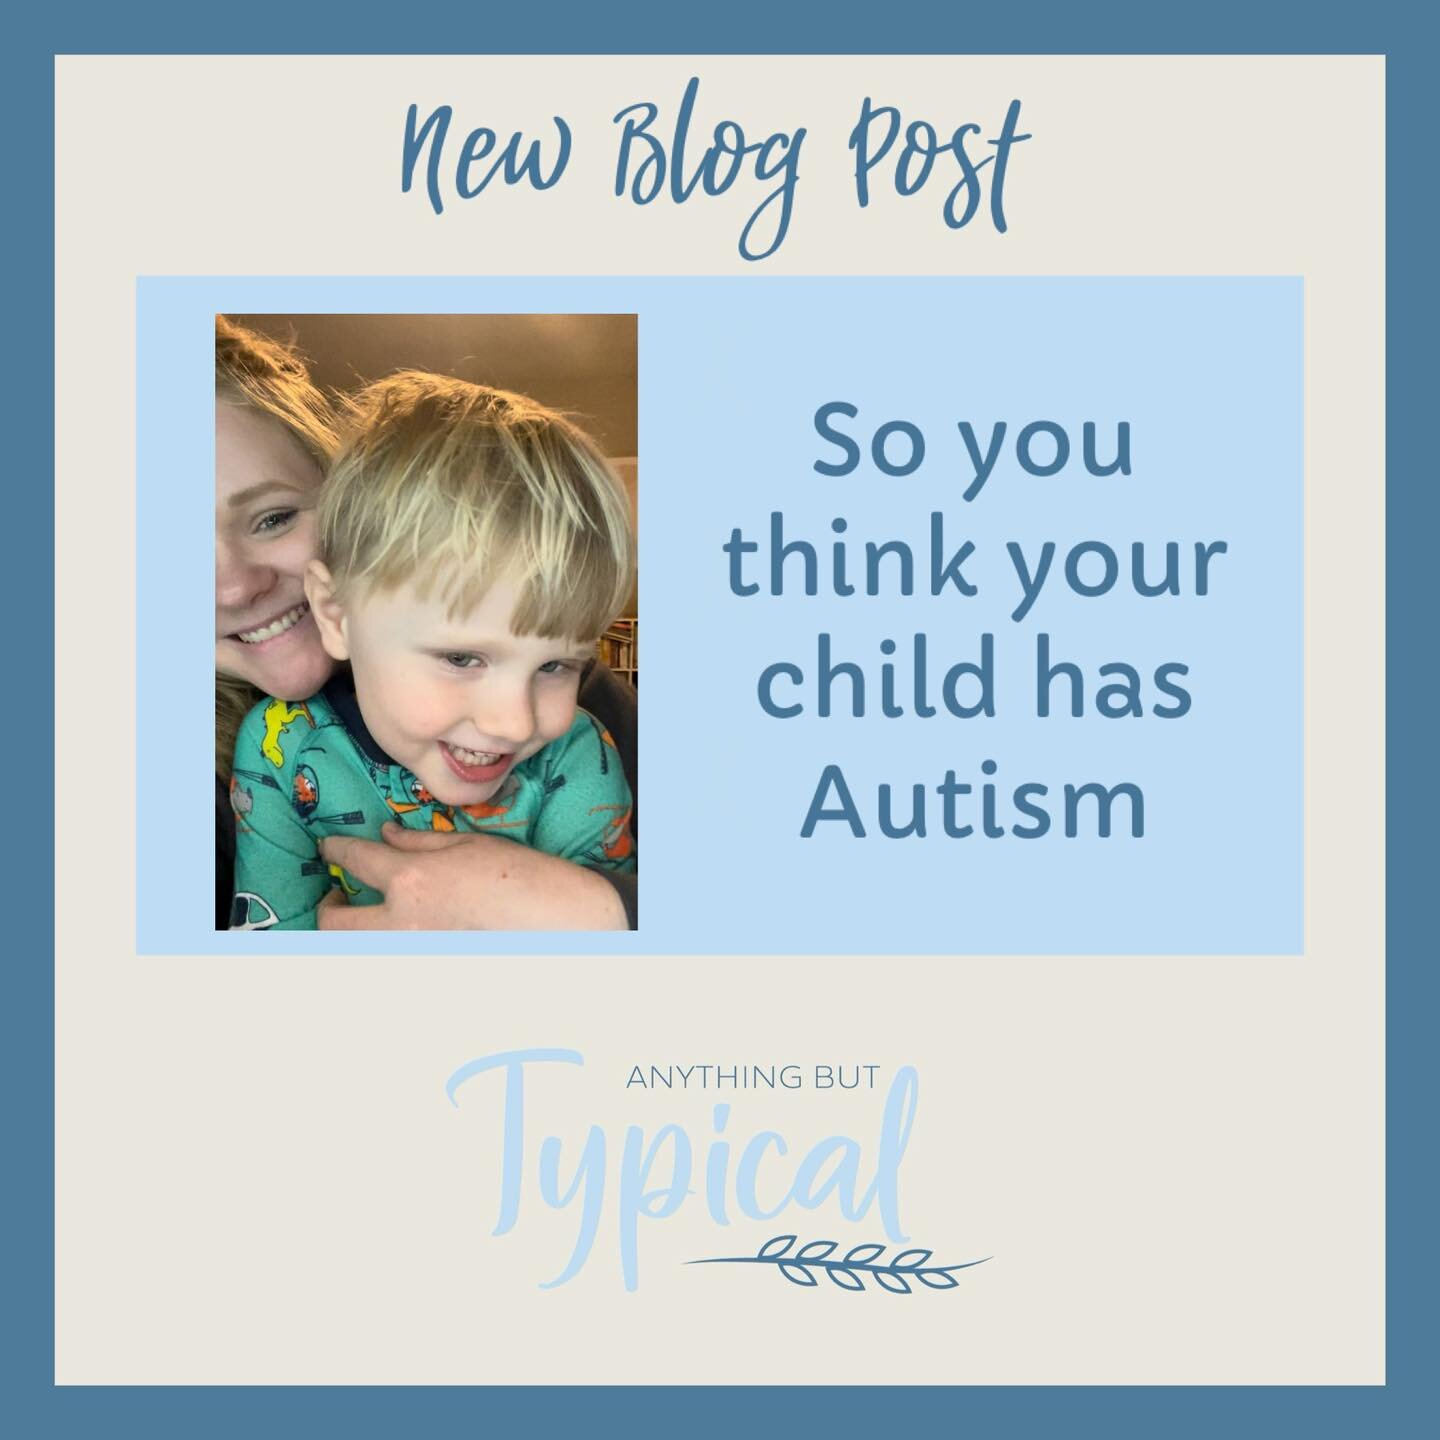 I have gotten a lot of parents in my inbox lately seeking advice because they suspect their child has Autism. I put this post together as a resource for those parents. This is based on my own personal experience with my child. Every child is unique, 